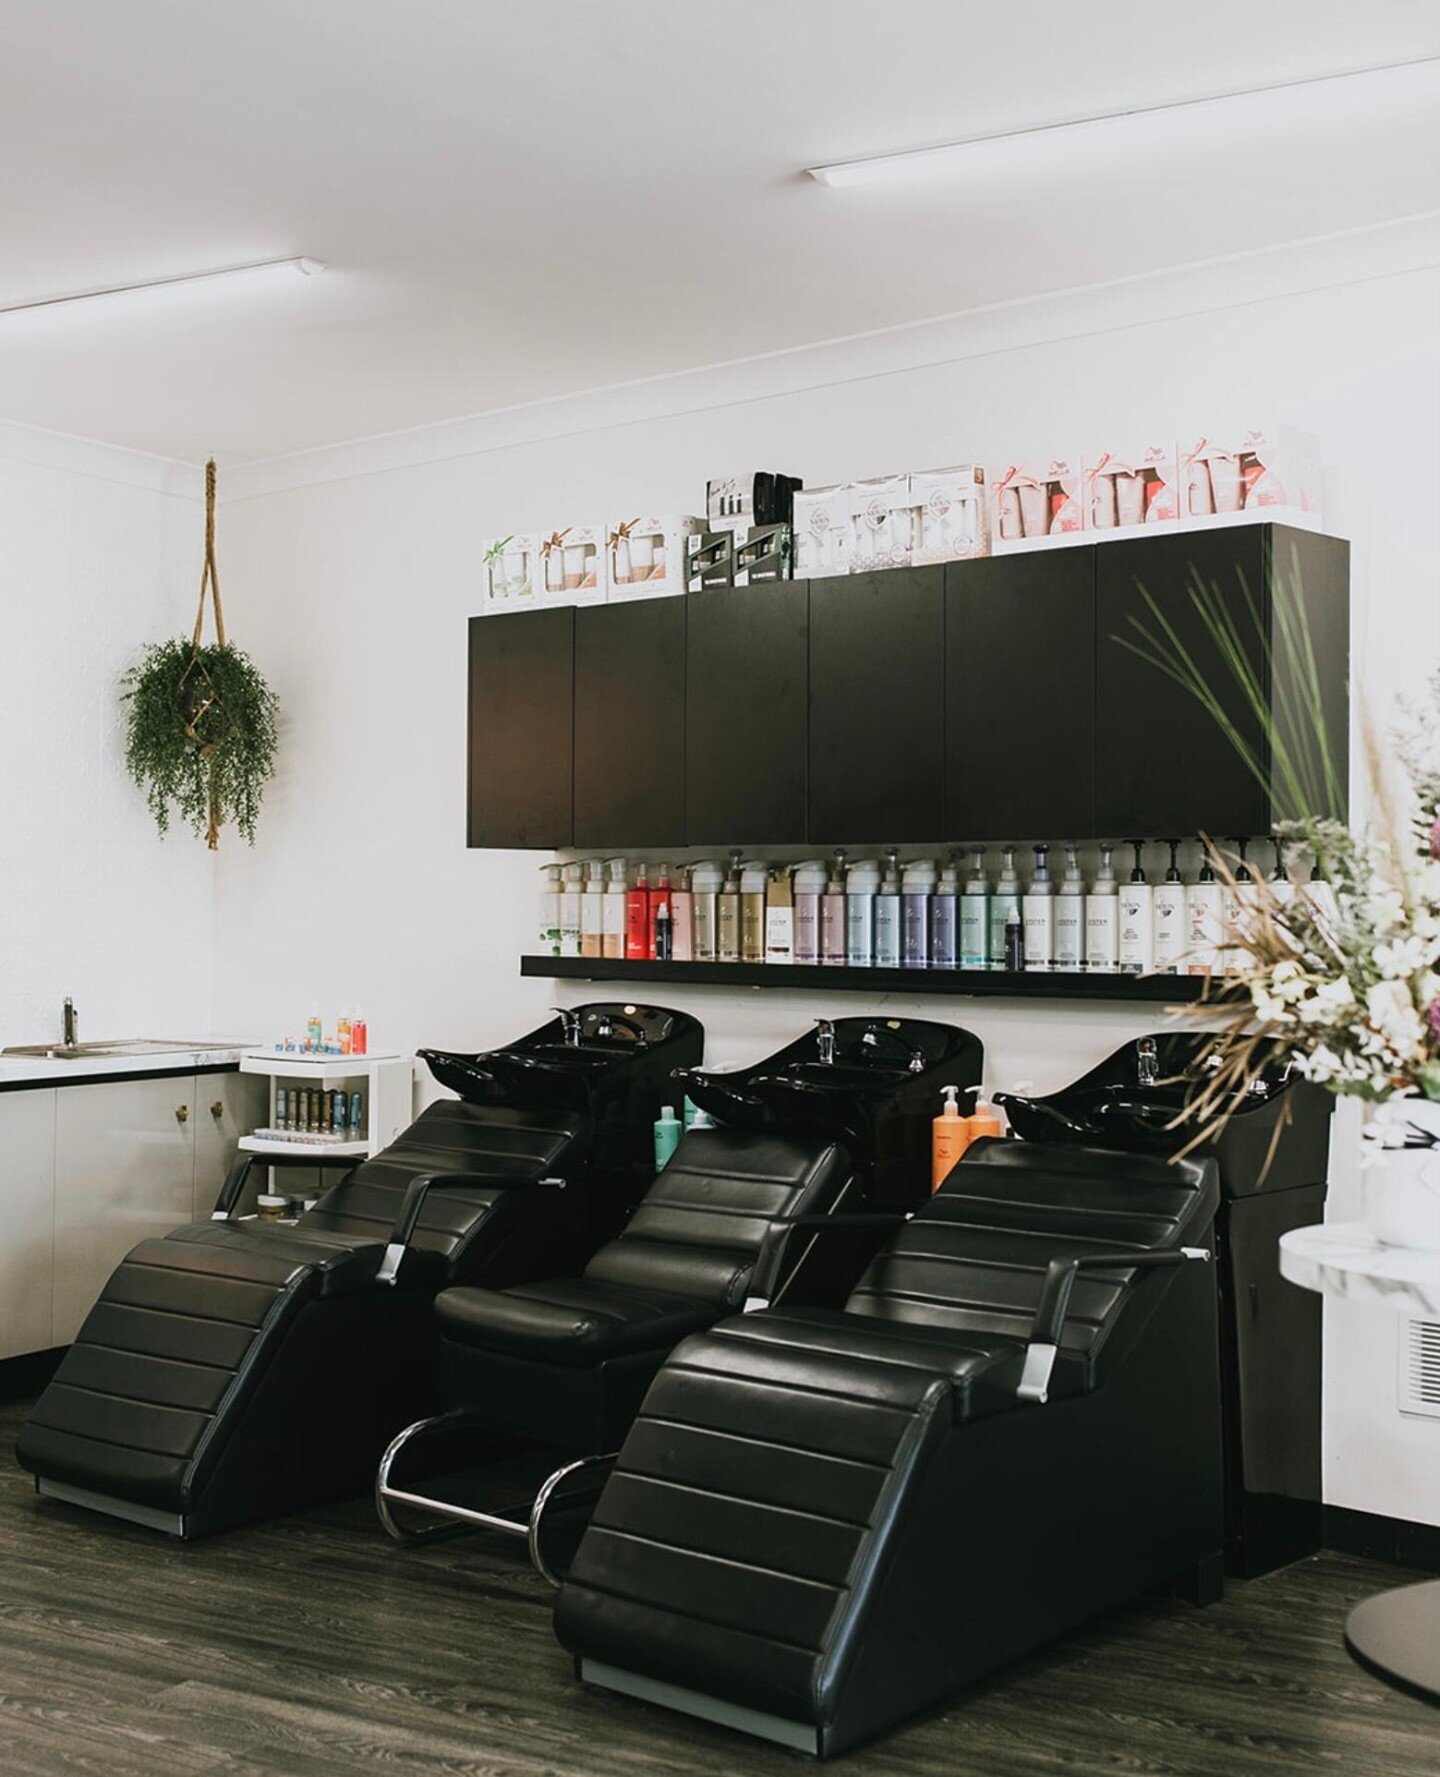 Our entire salon is designed to make you feel as comfortable and relaxed as possible 🌿⁠
⁠
The basins and chairs were handpicked to ensure that you have the most beautiful experience at the basin every single time you visit.⁠
⁠
.⁠
.⁠
.⁠
⁠
⁠
#Annandal